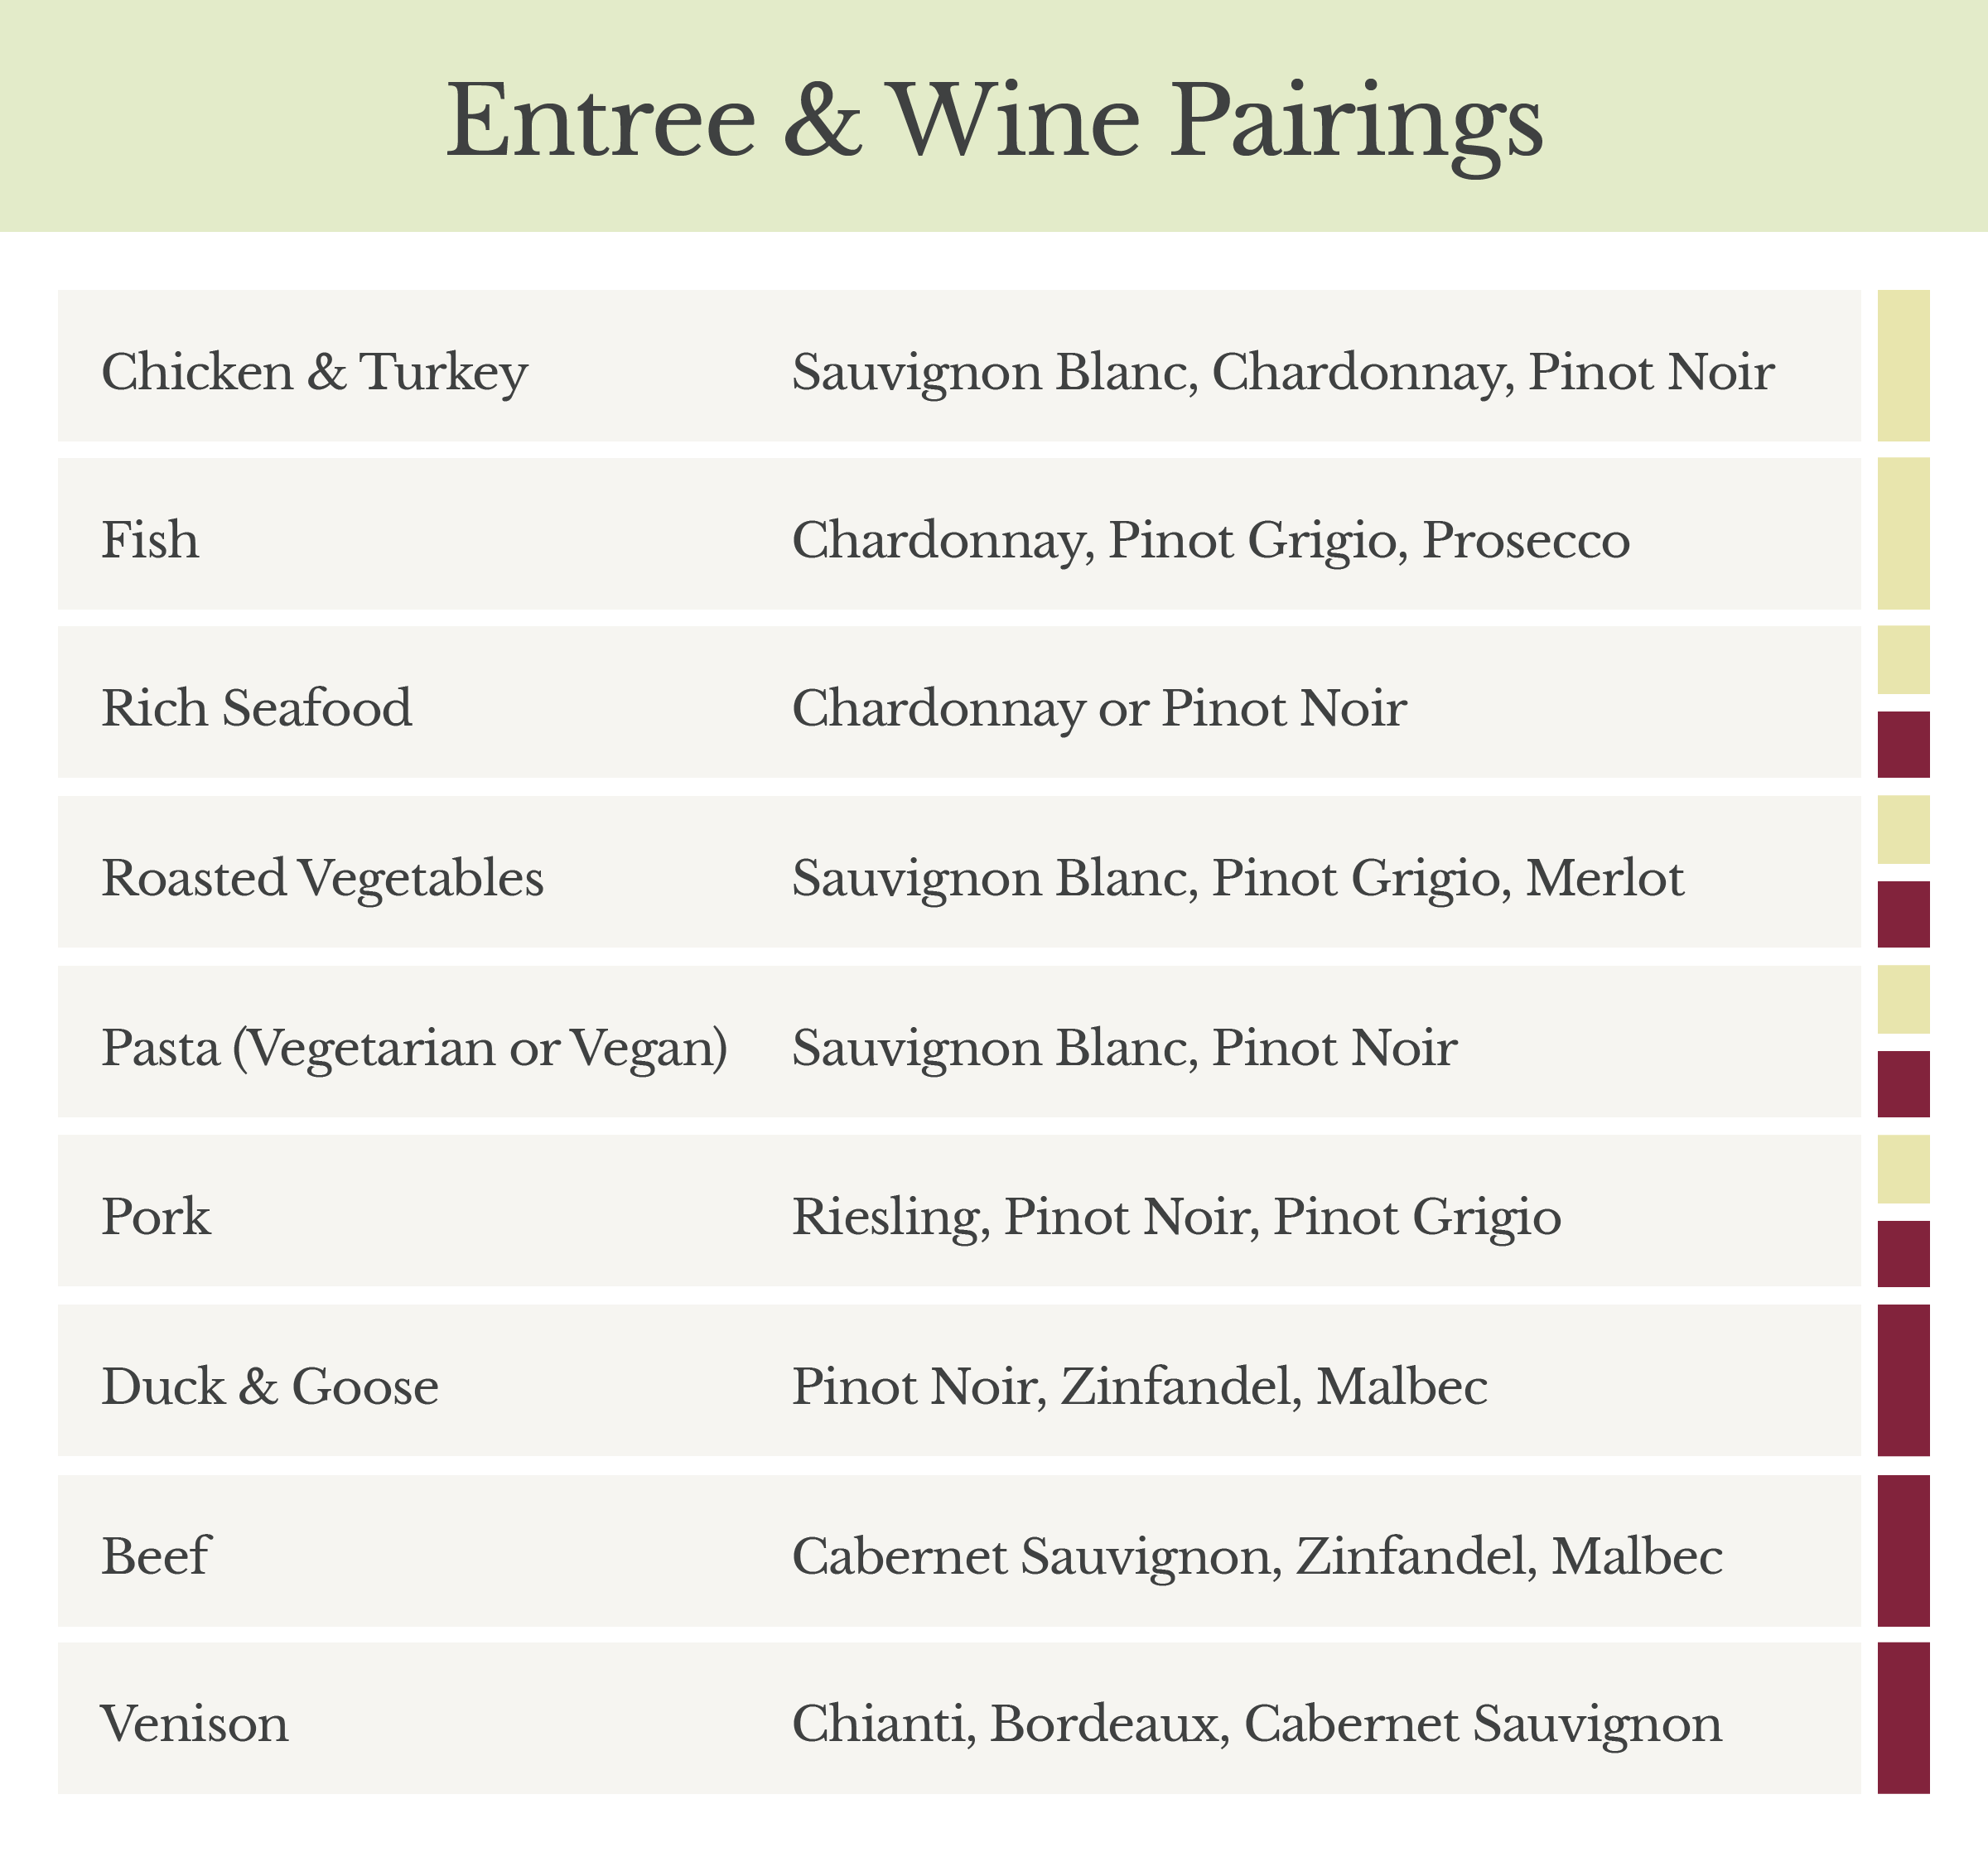 10 dinner and wine pairing ideas in a chart.